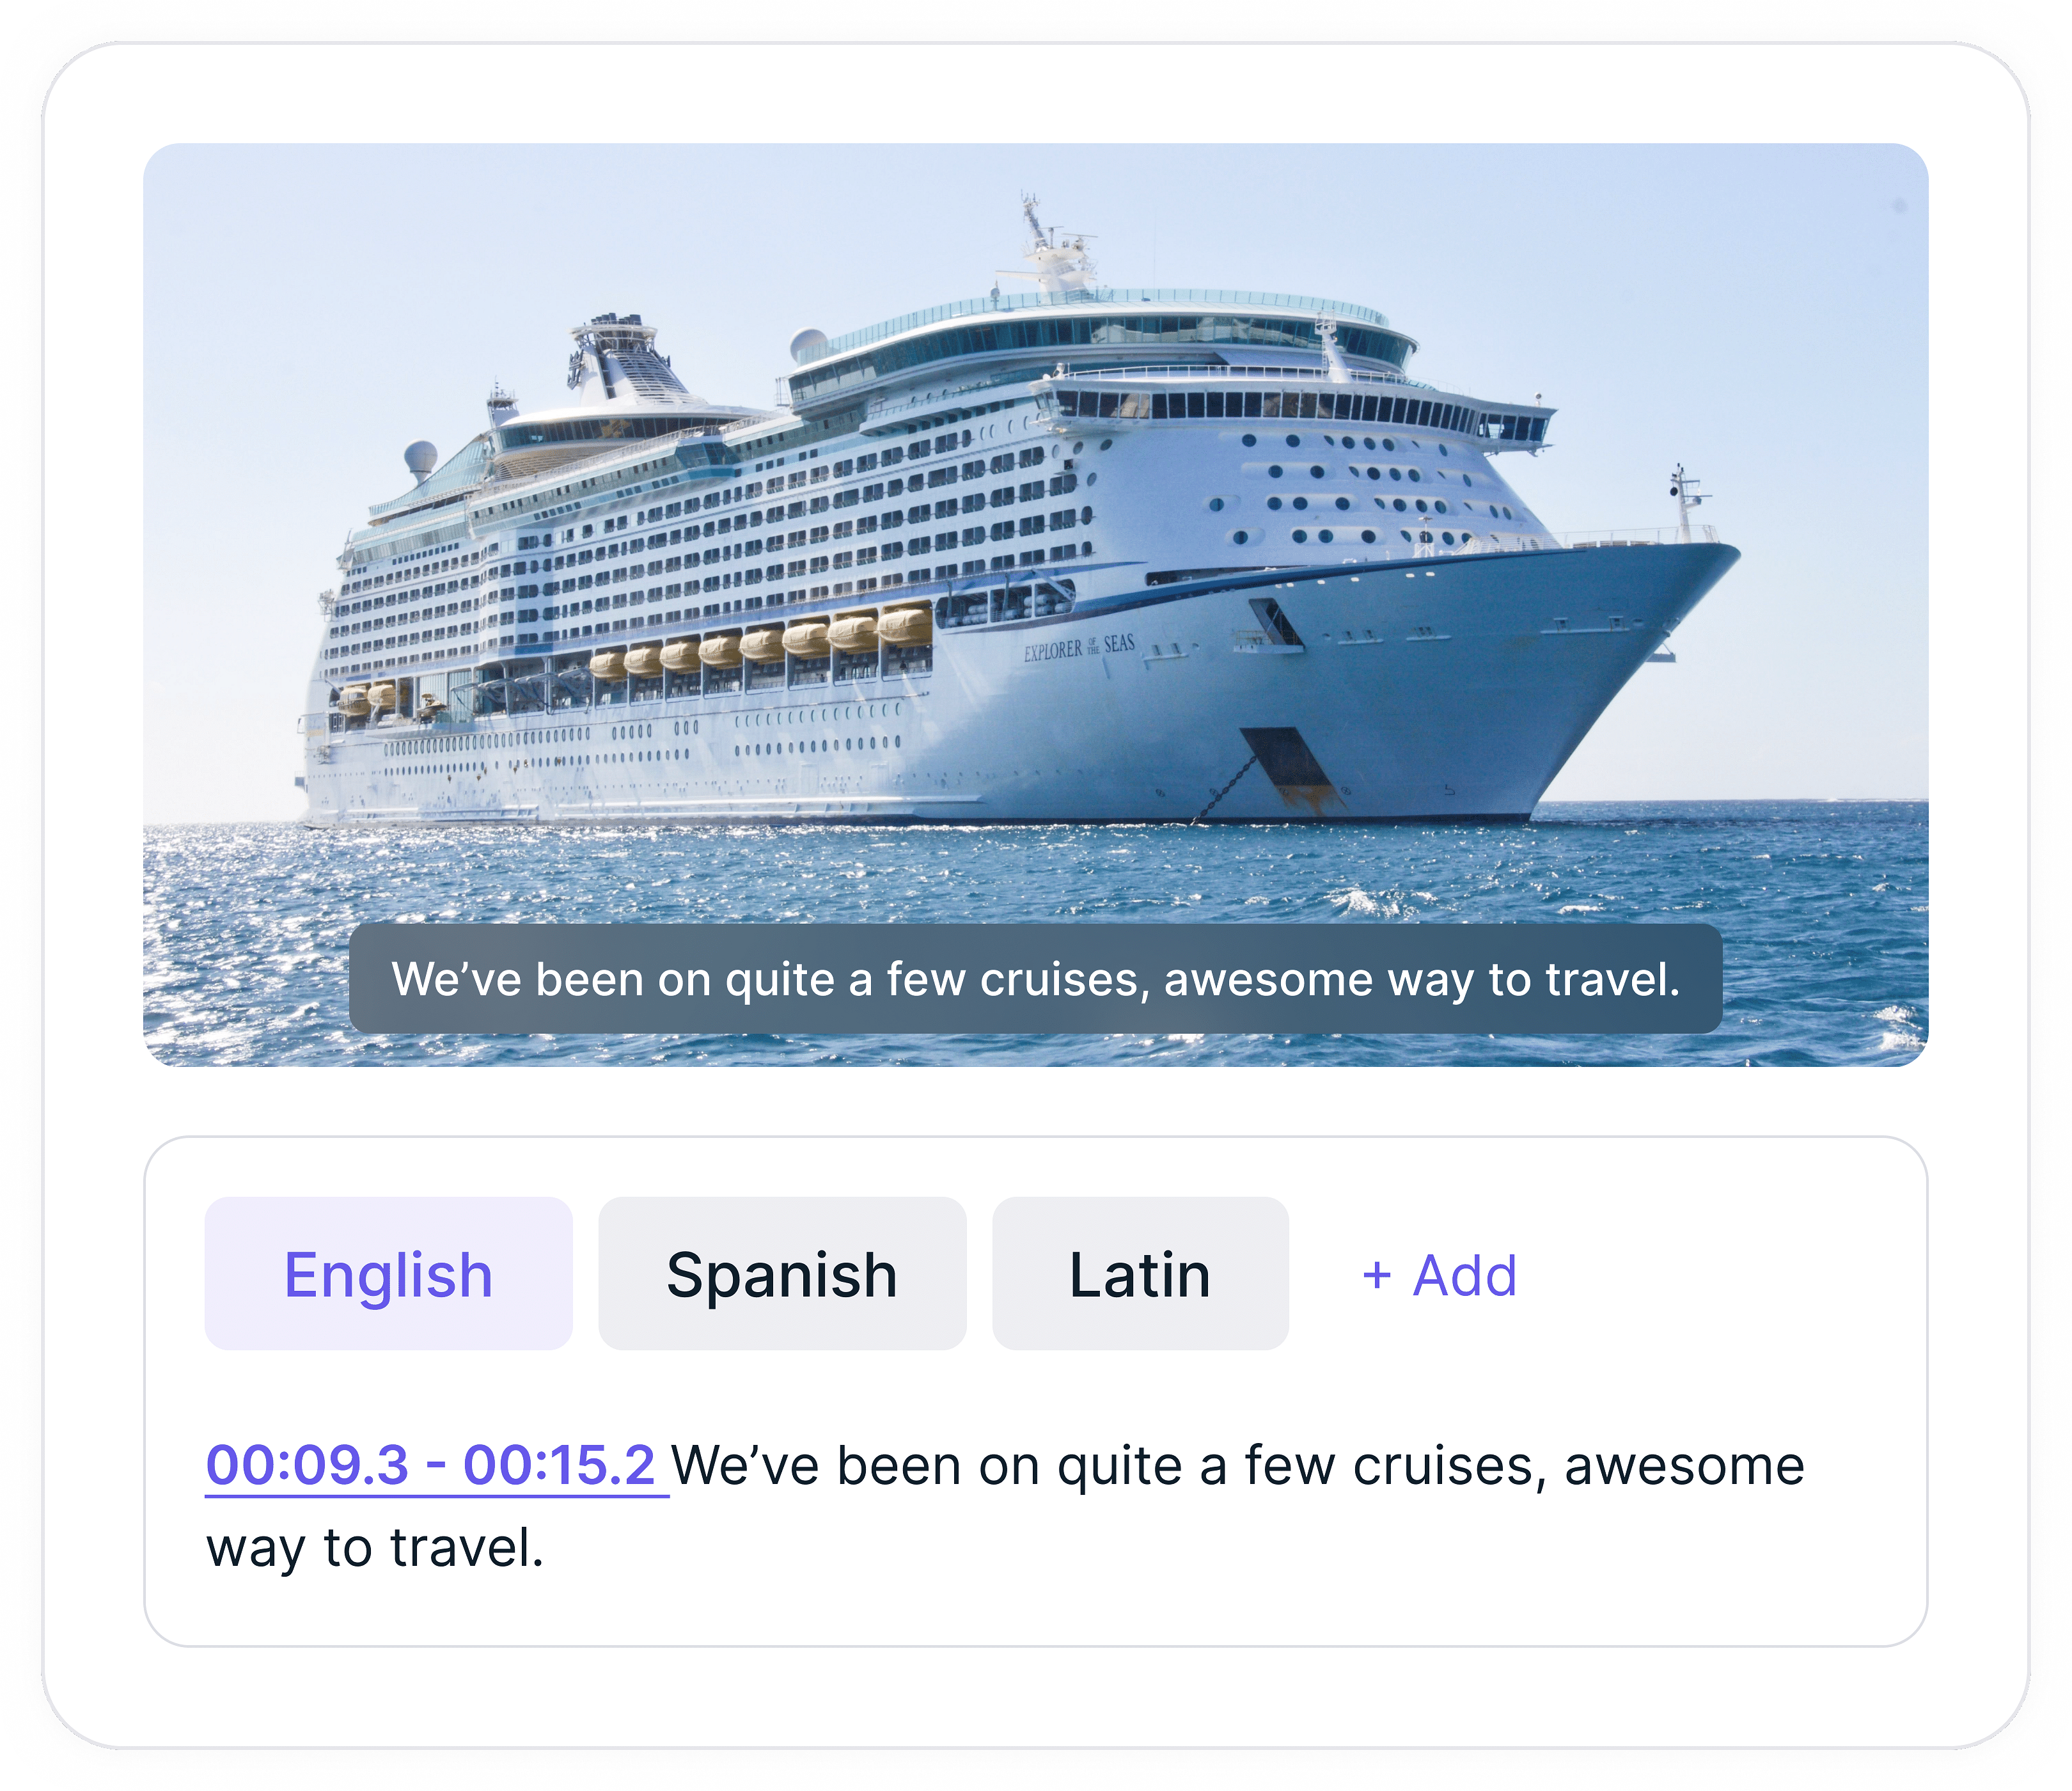 subtitle added to video about cruise ship